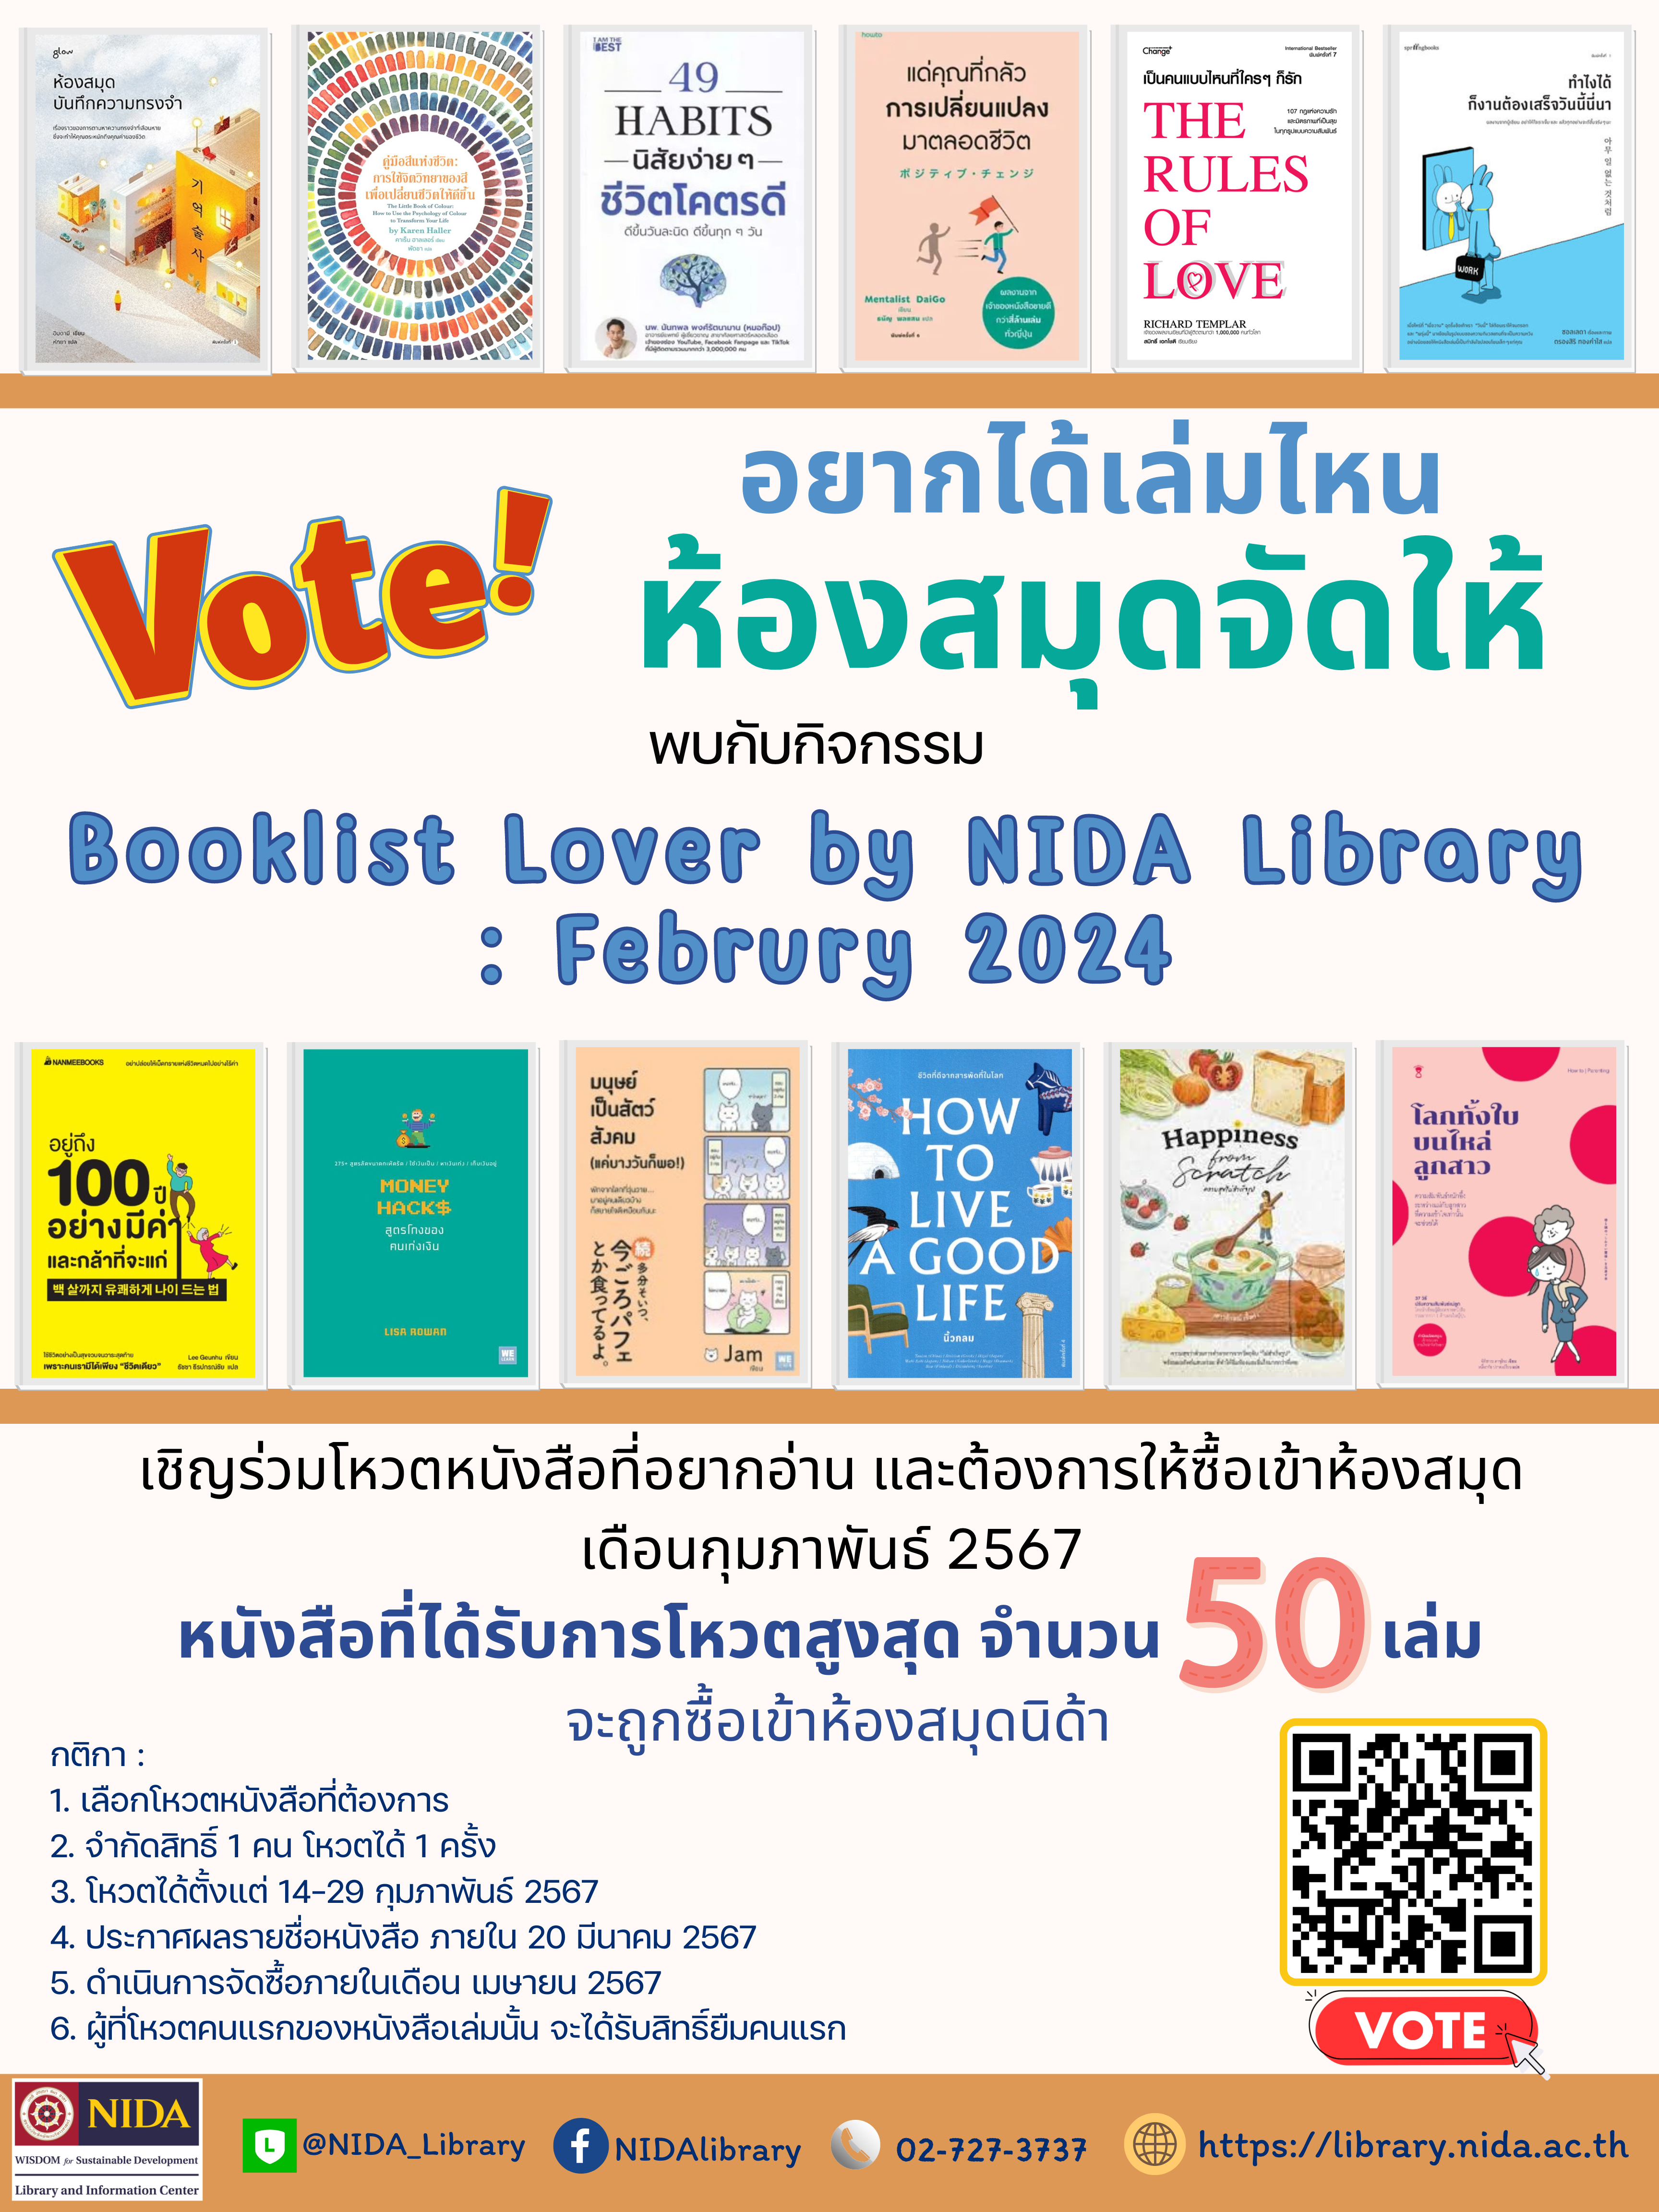 Booklist Lover by NIDA Library